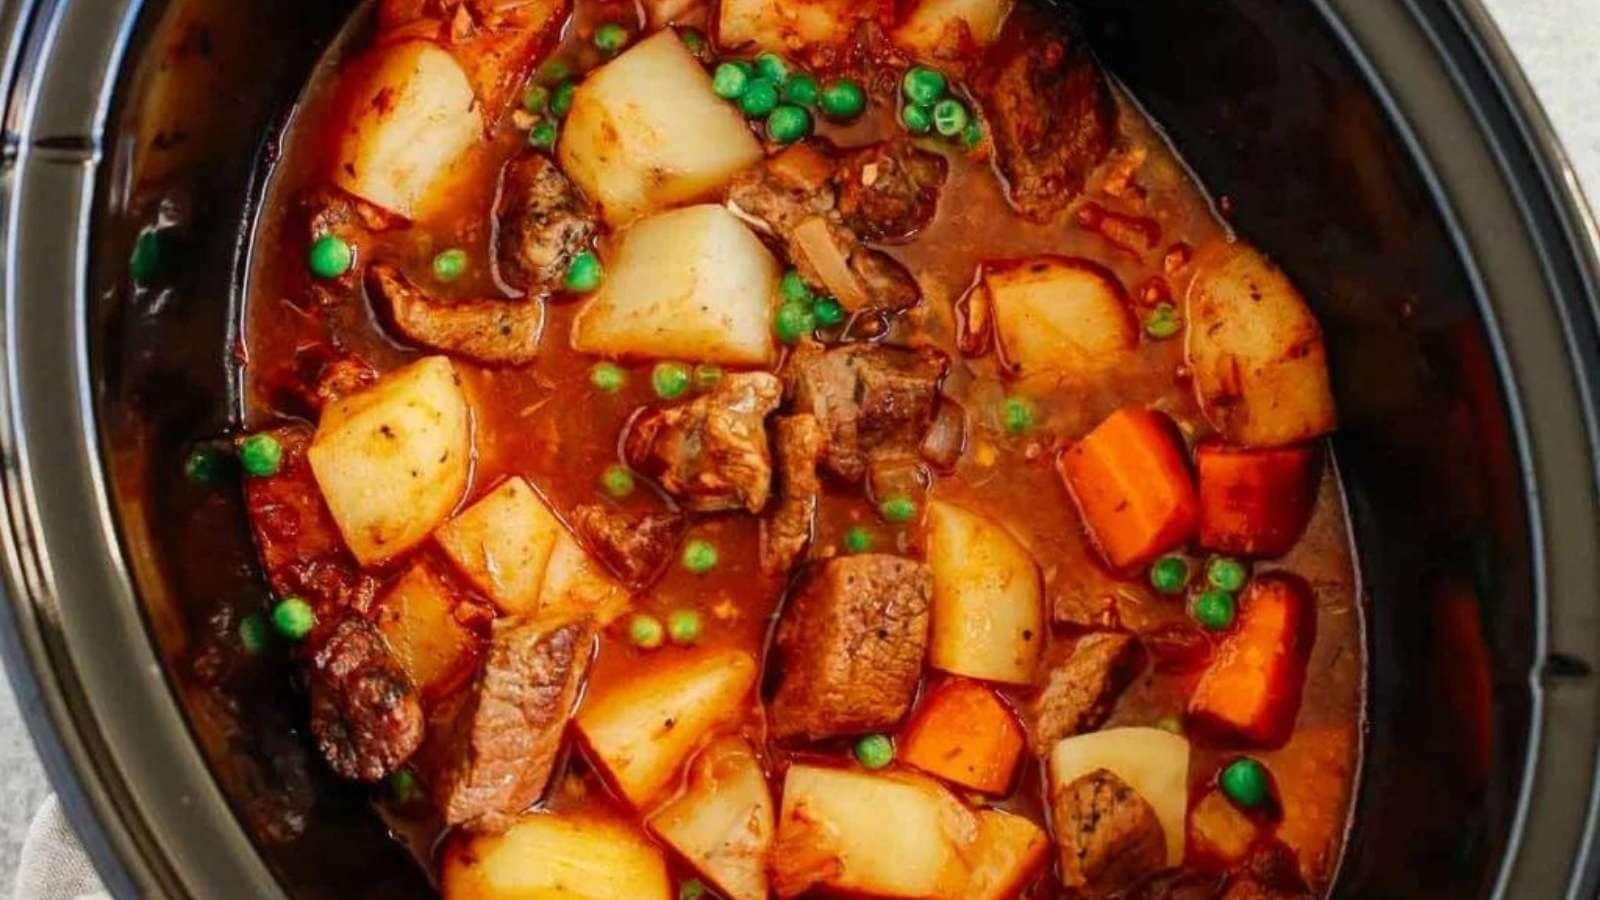 A crock pot full of beef, potatoes and peas.